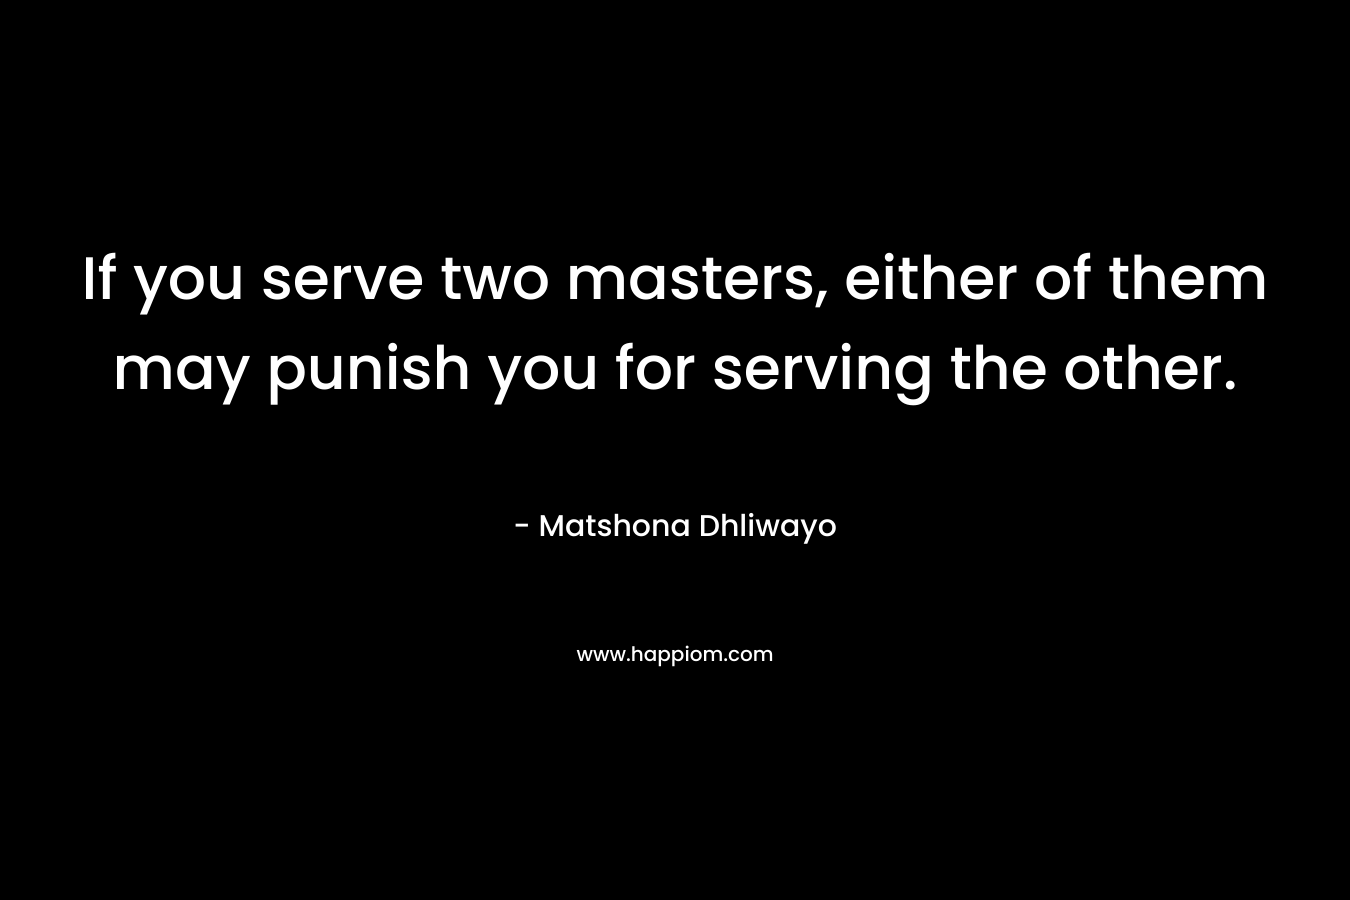 If you serve two masters, either of them may punish you for serving the other.